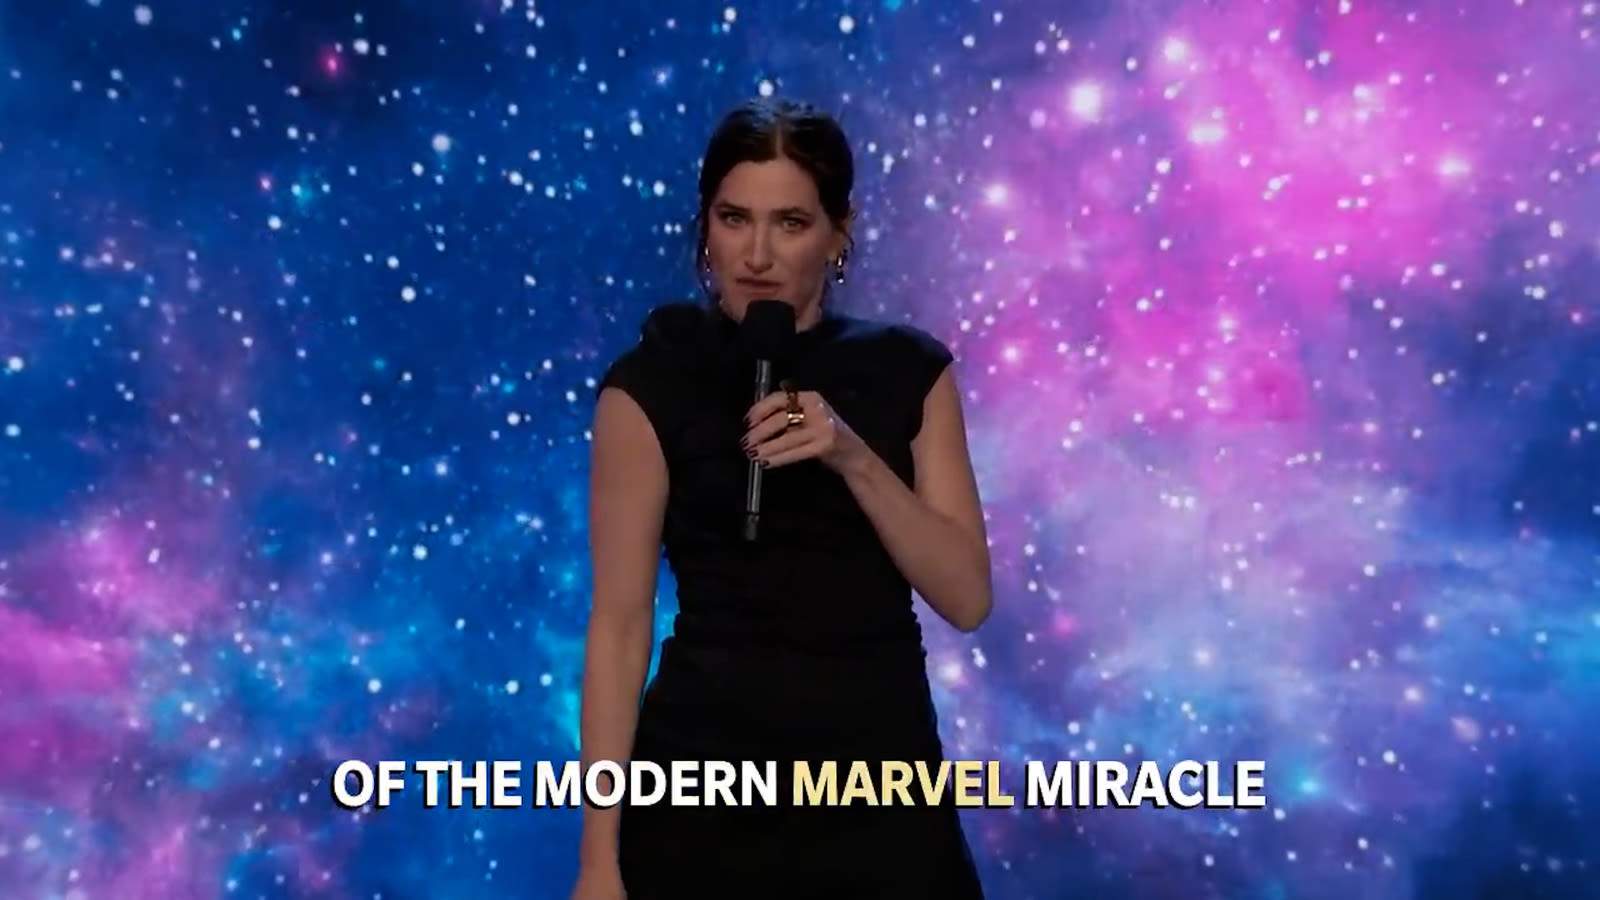 Kathryn Hahn summarized the entirety of the Marvel Universe through song on 'Jimmy Kimmel Live!'